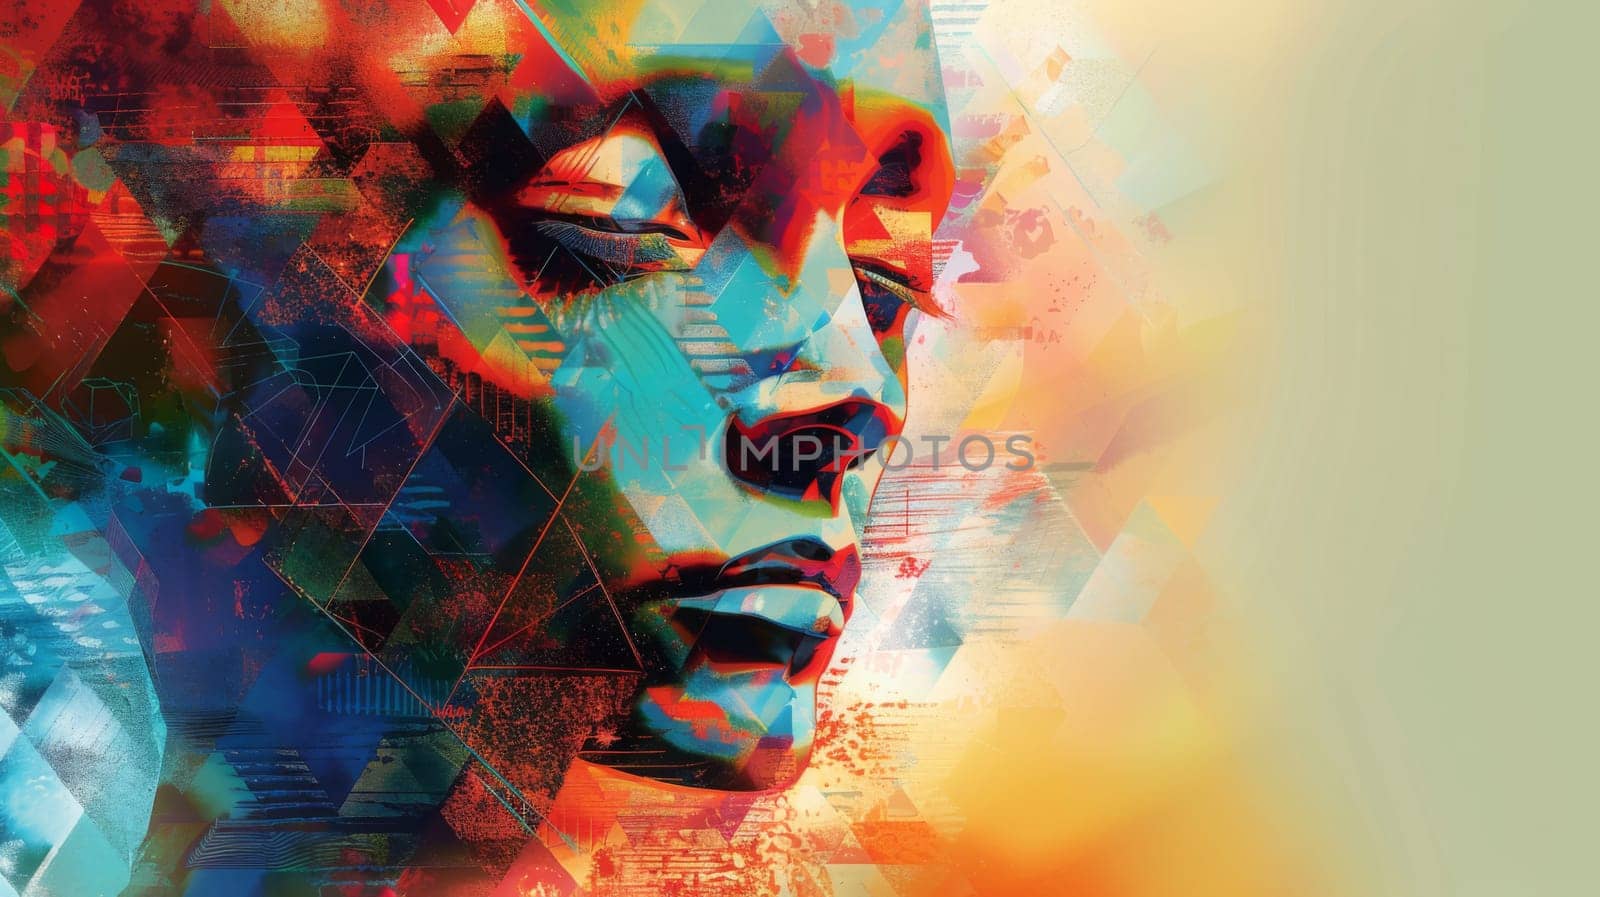 A digital painting of a woman's face with geometric shapes